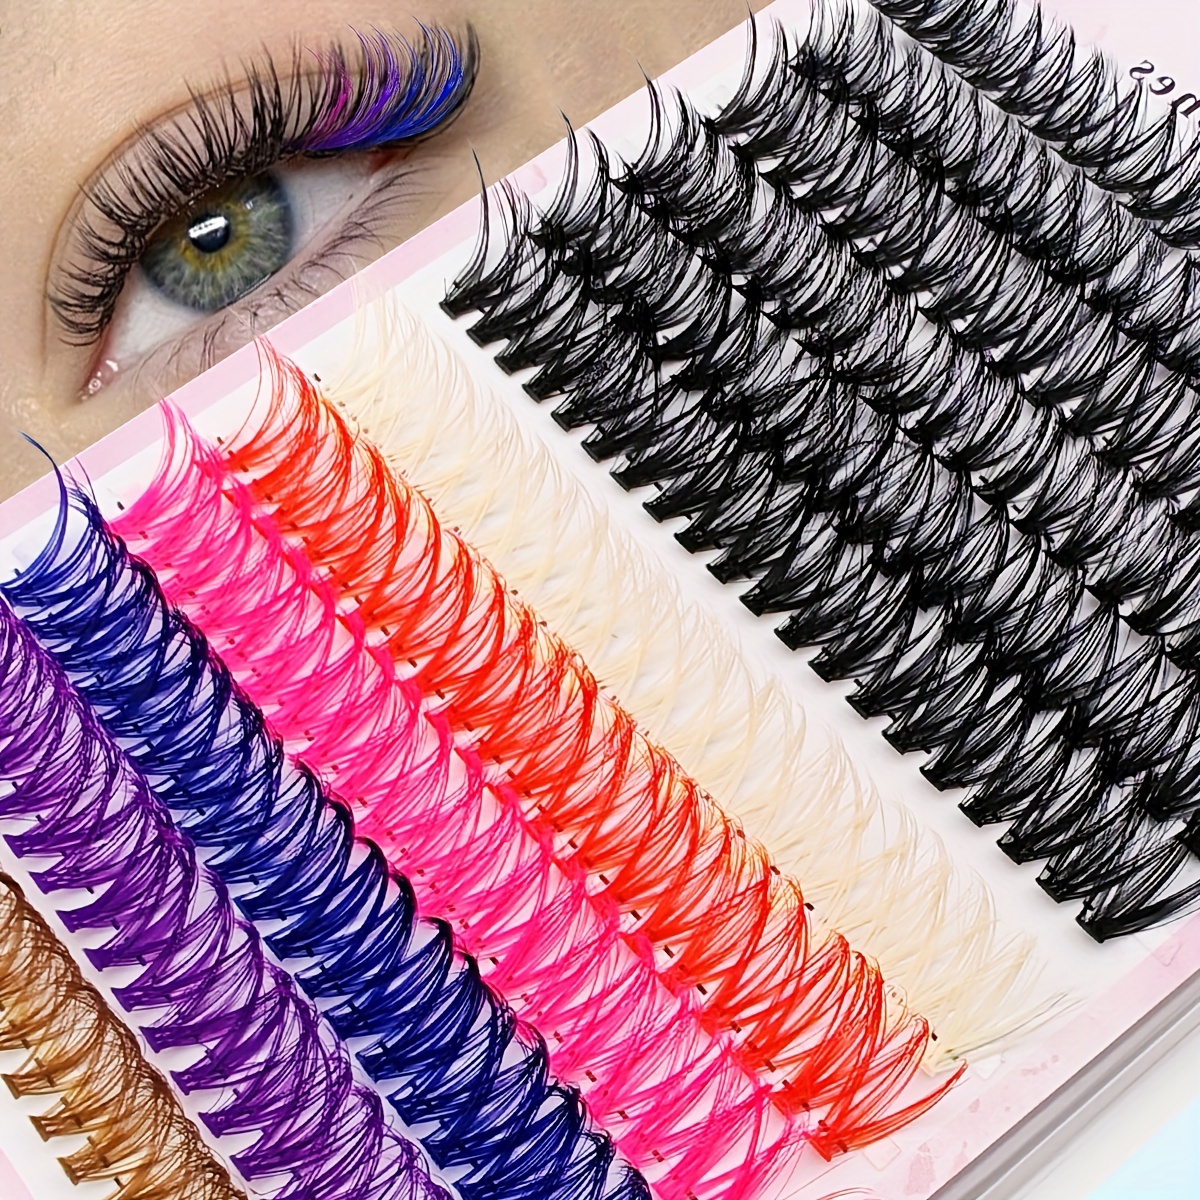 

240-piece Multicolor Cluster False Eyelashes Set - Diy Fluffy & Thick Cat Eye Style D Mixed Lengths 10-18mm - Natural Look Faux Mink Lashes